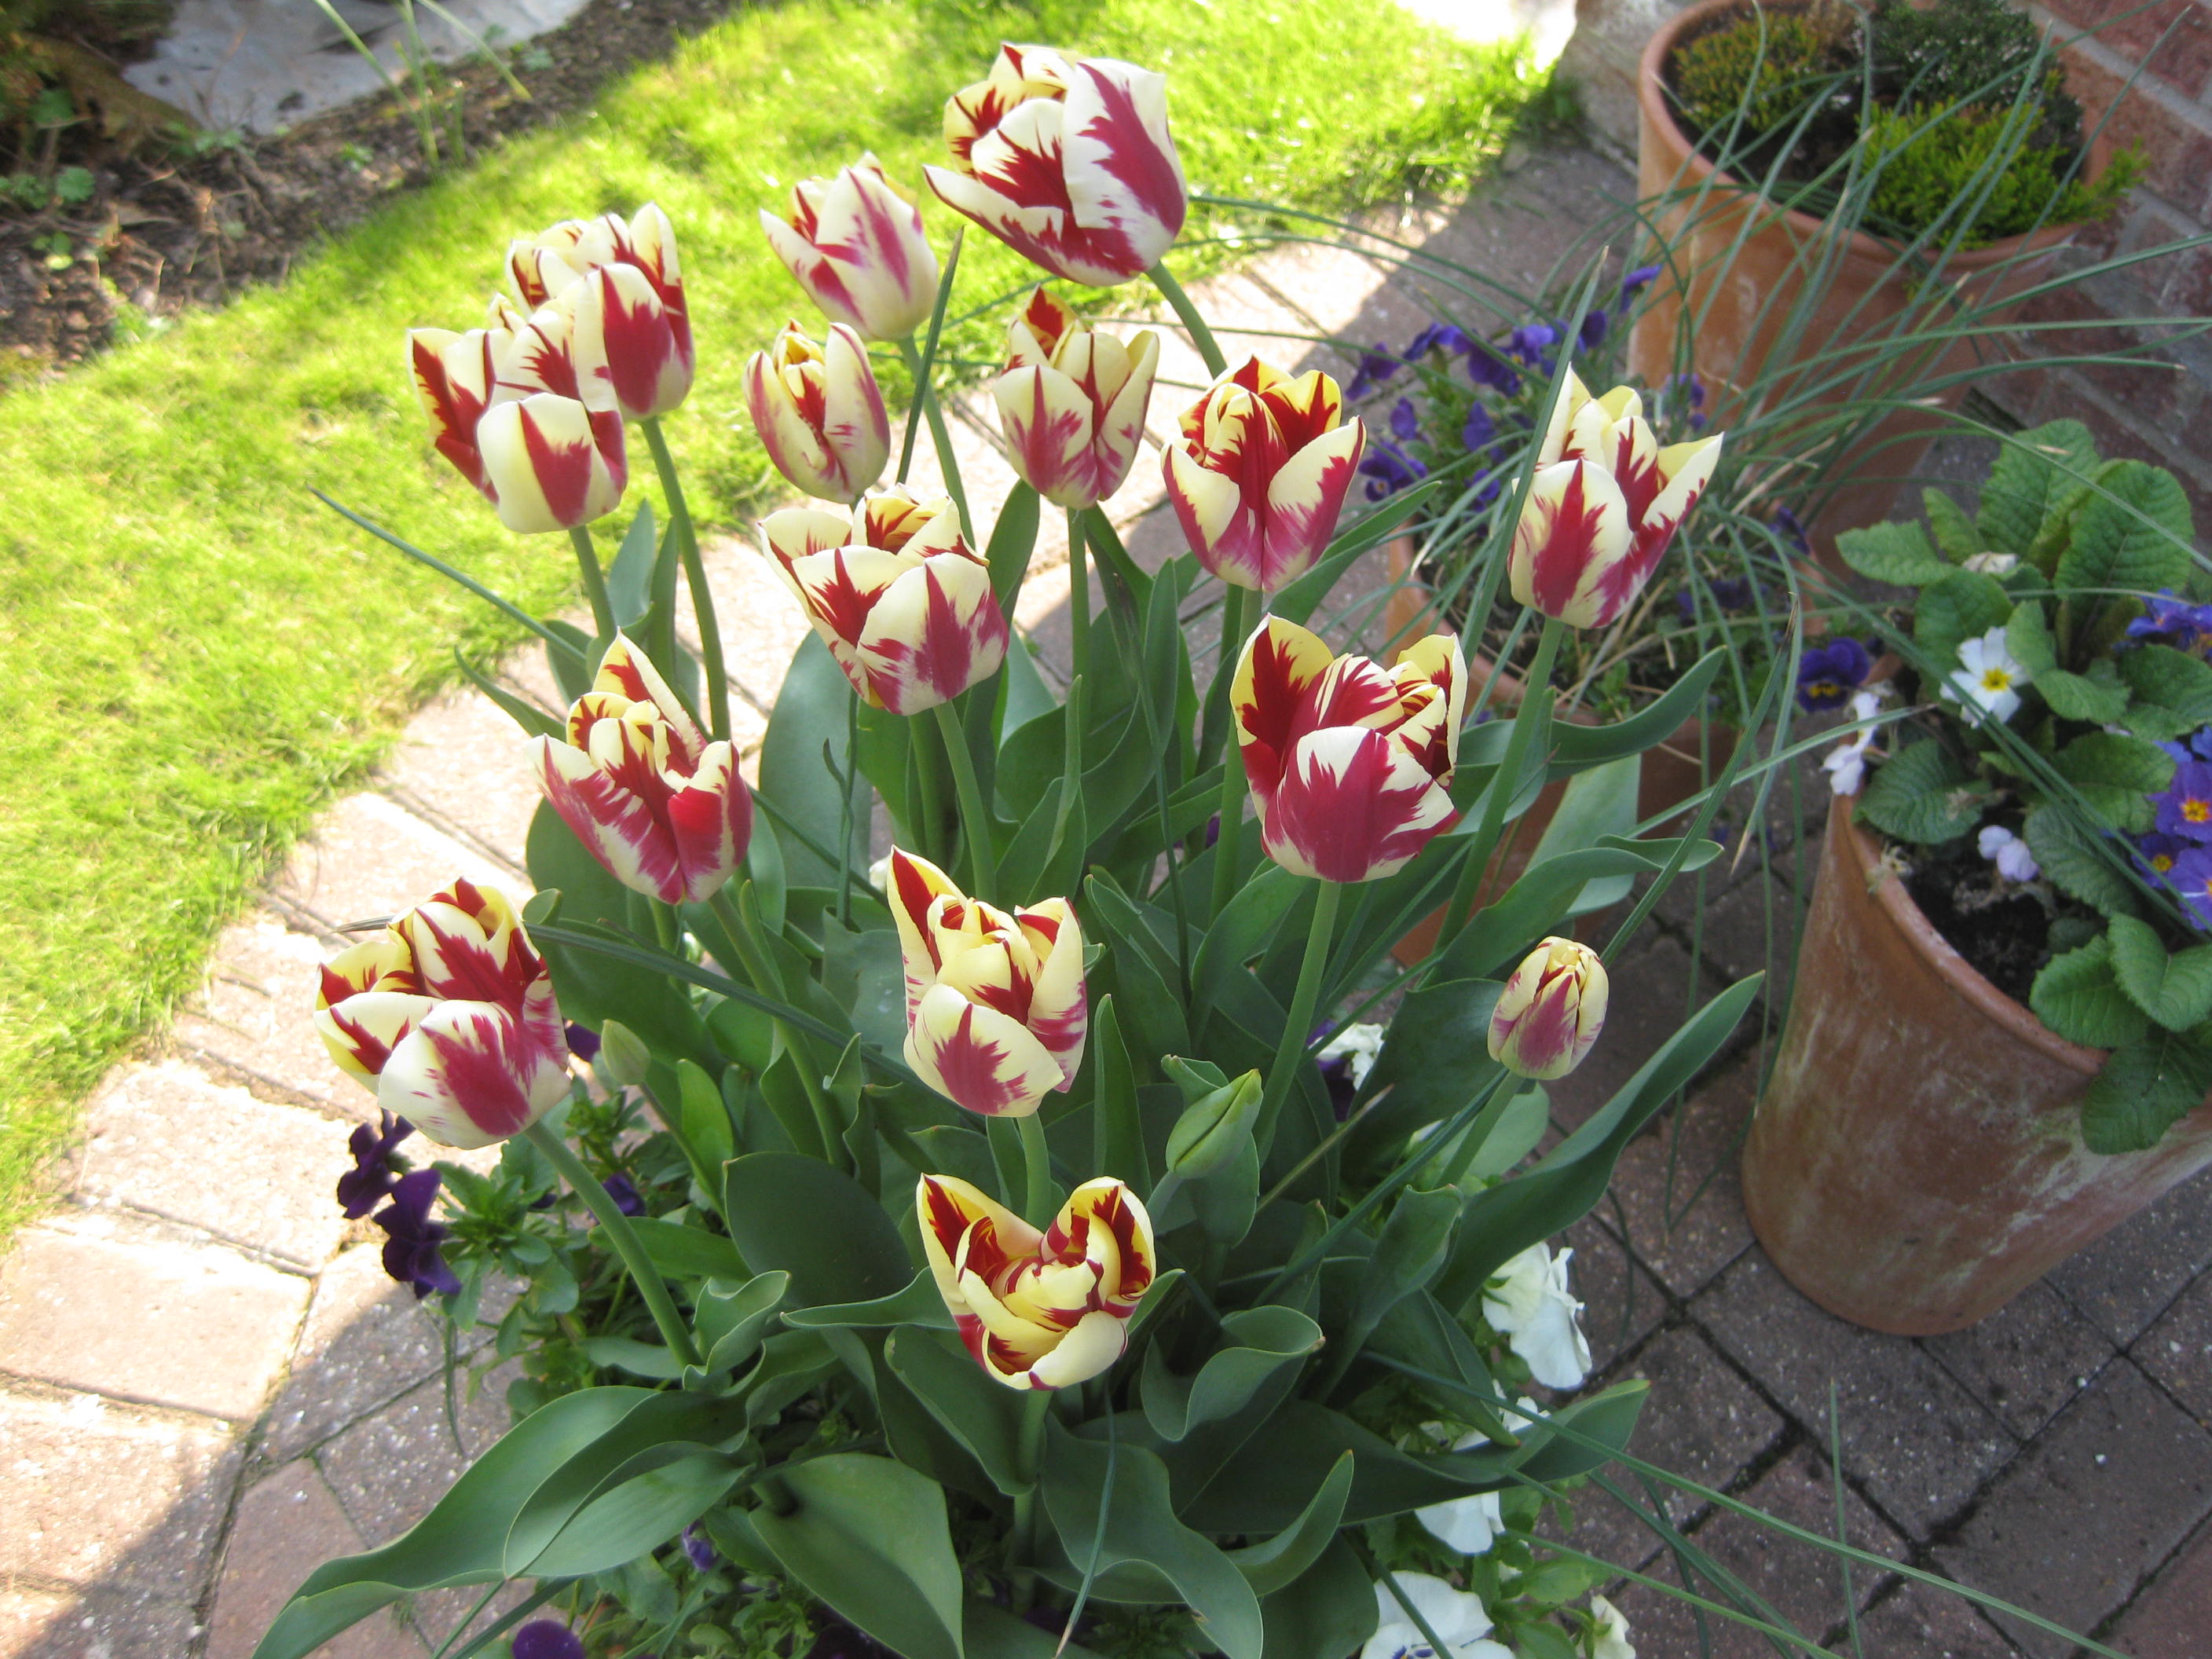 Motley tulips are the best to put in a pot in your garden. They are 